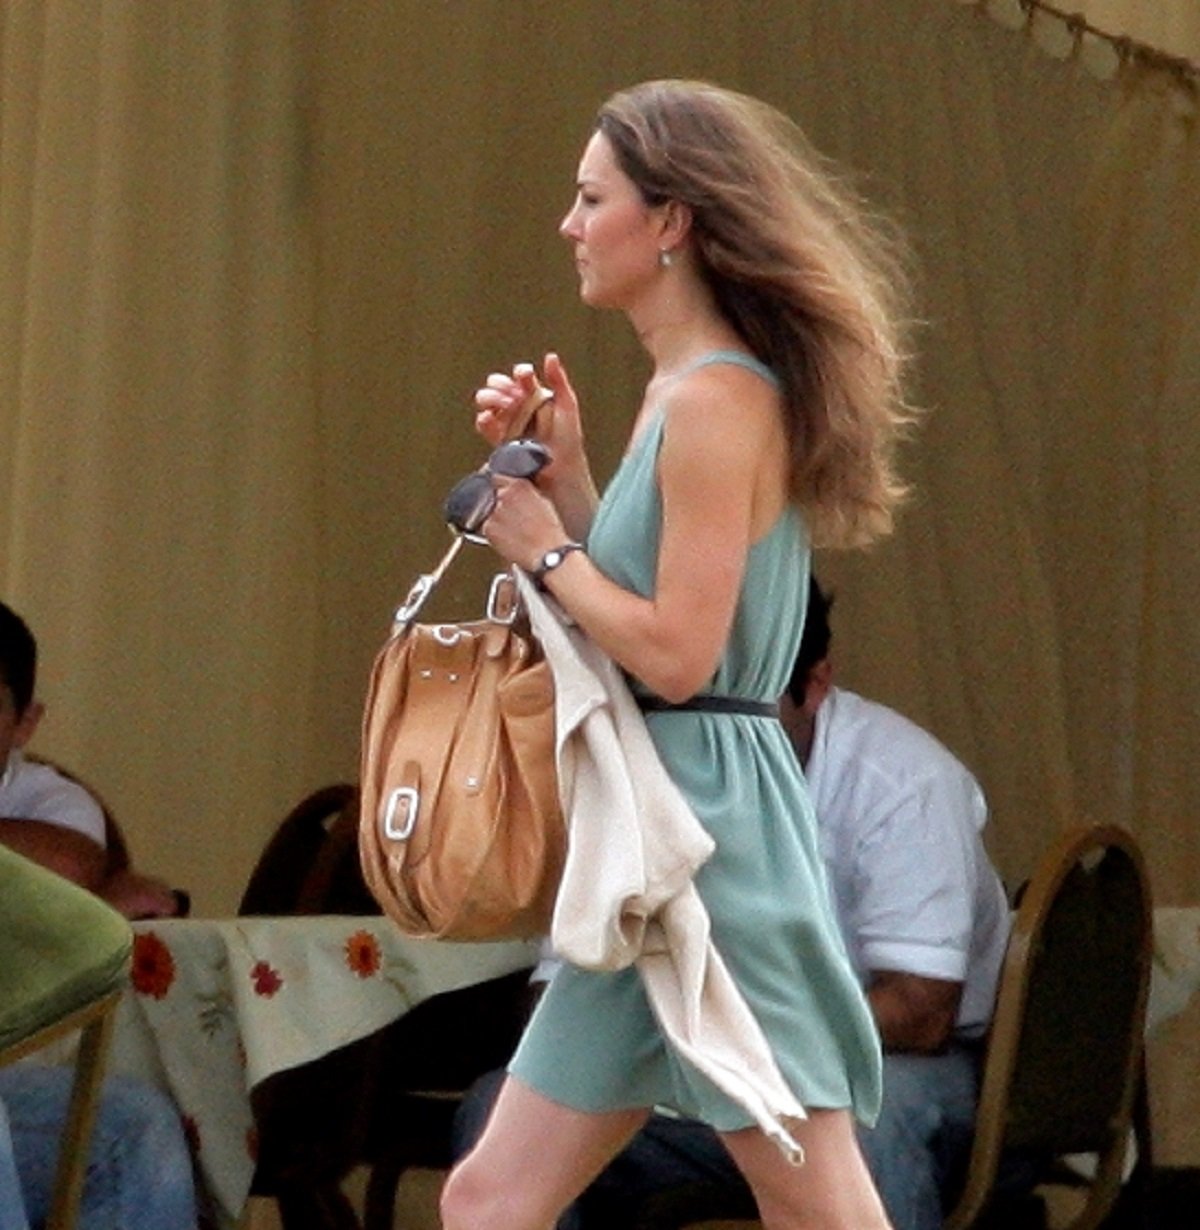 Kate Middleton attending the Chakravarty Cup polo match walking in a green dress holding a large brown handbag